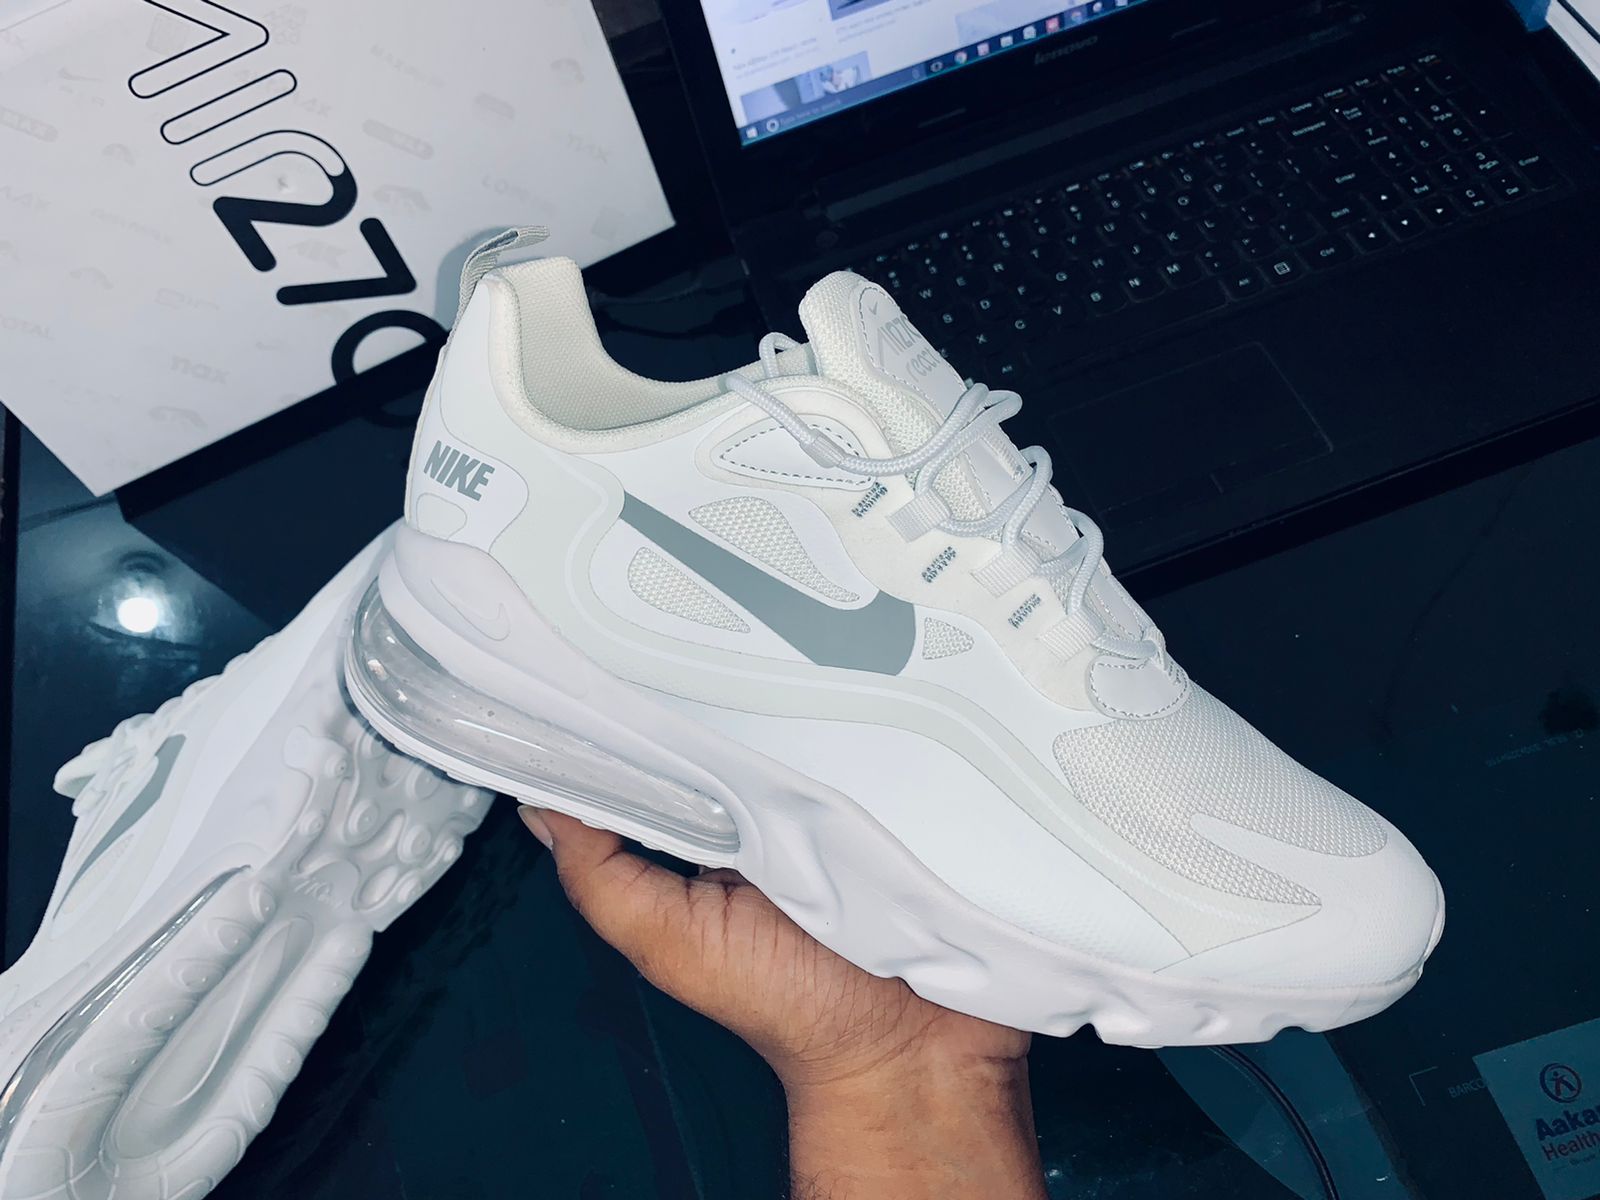 Mediator Proverb rinse Nike Airmax white 270 React 1st Copy Shoes